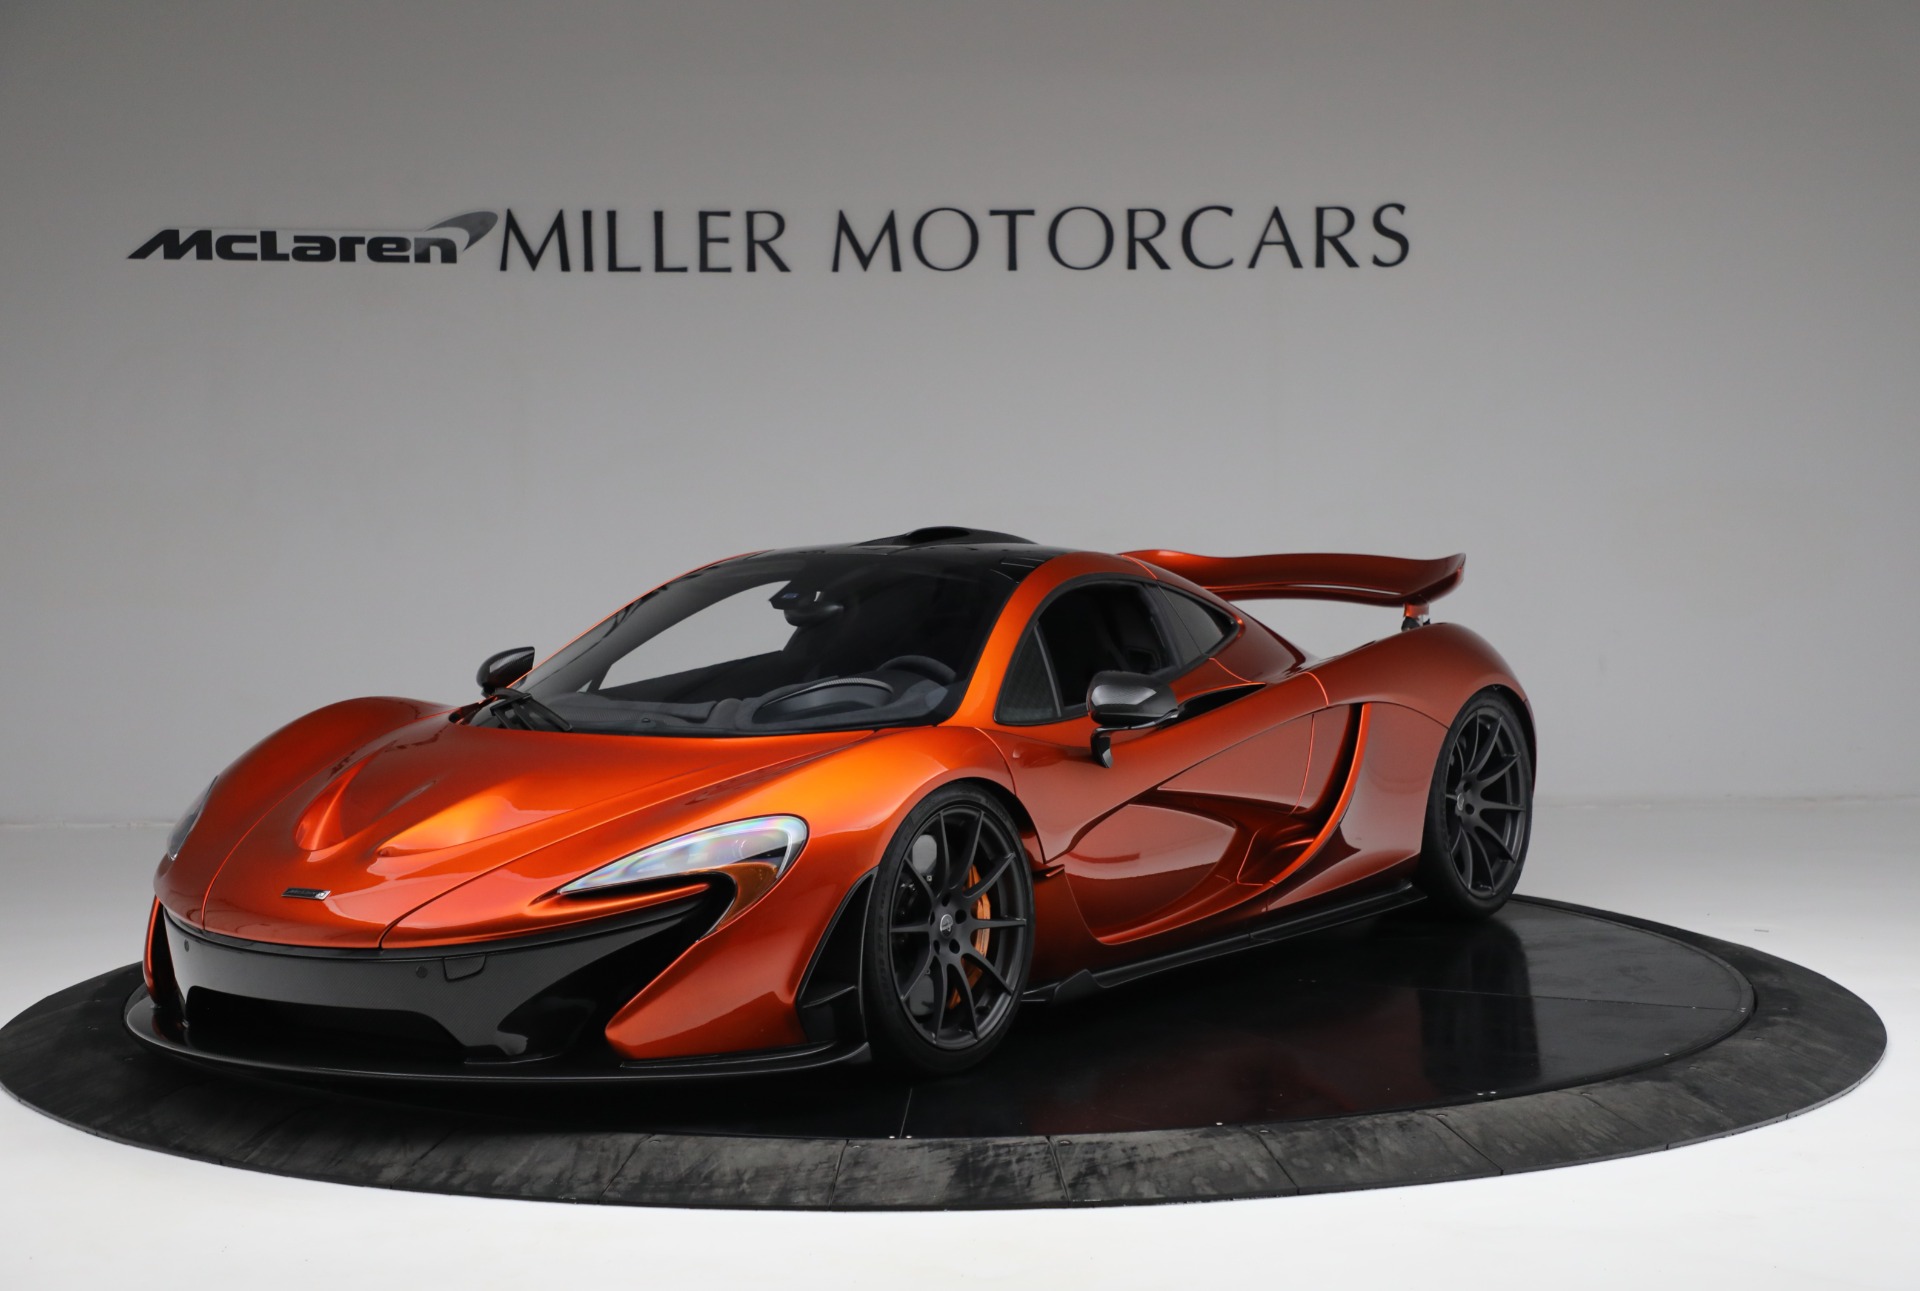 Used 2015 McLaren P1 for sale $2,000,000 at McLaren Greenwich in Greenwich CT 06830 1